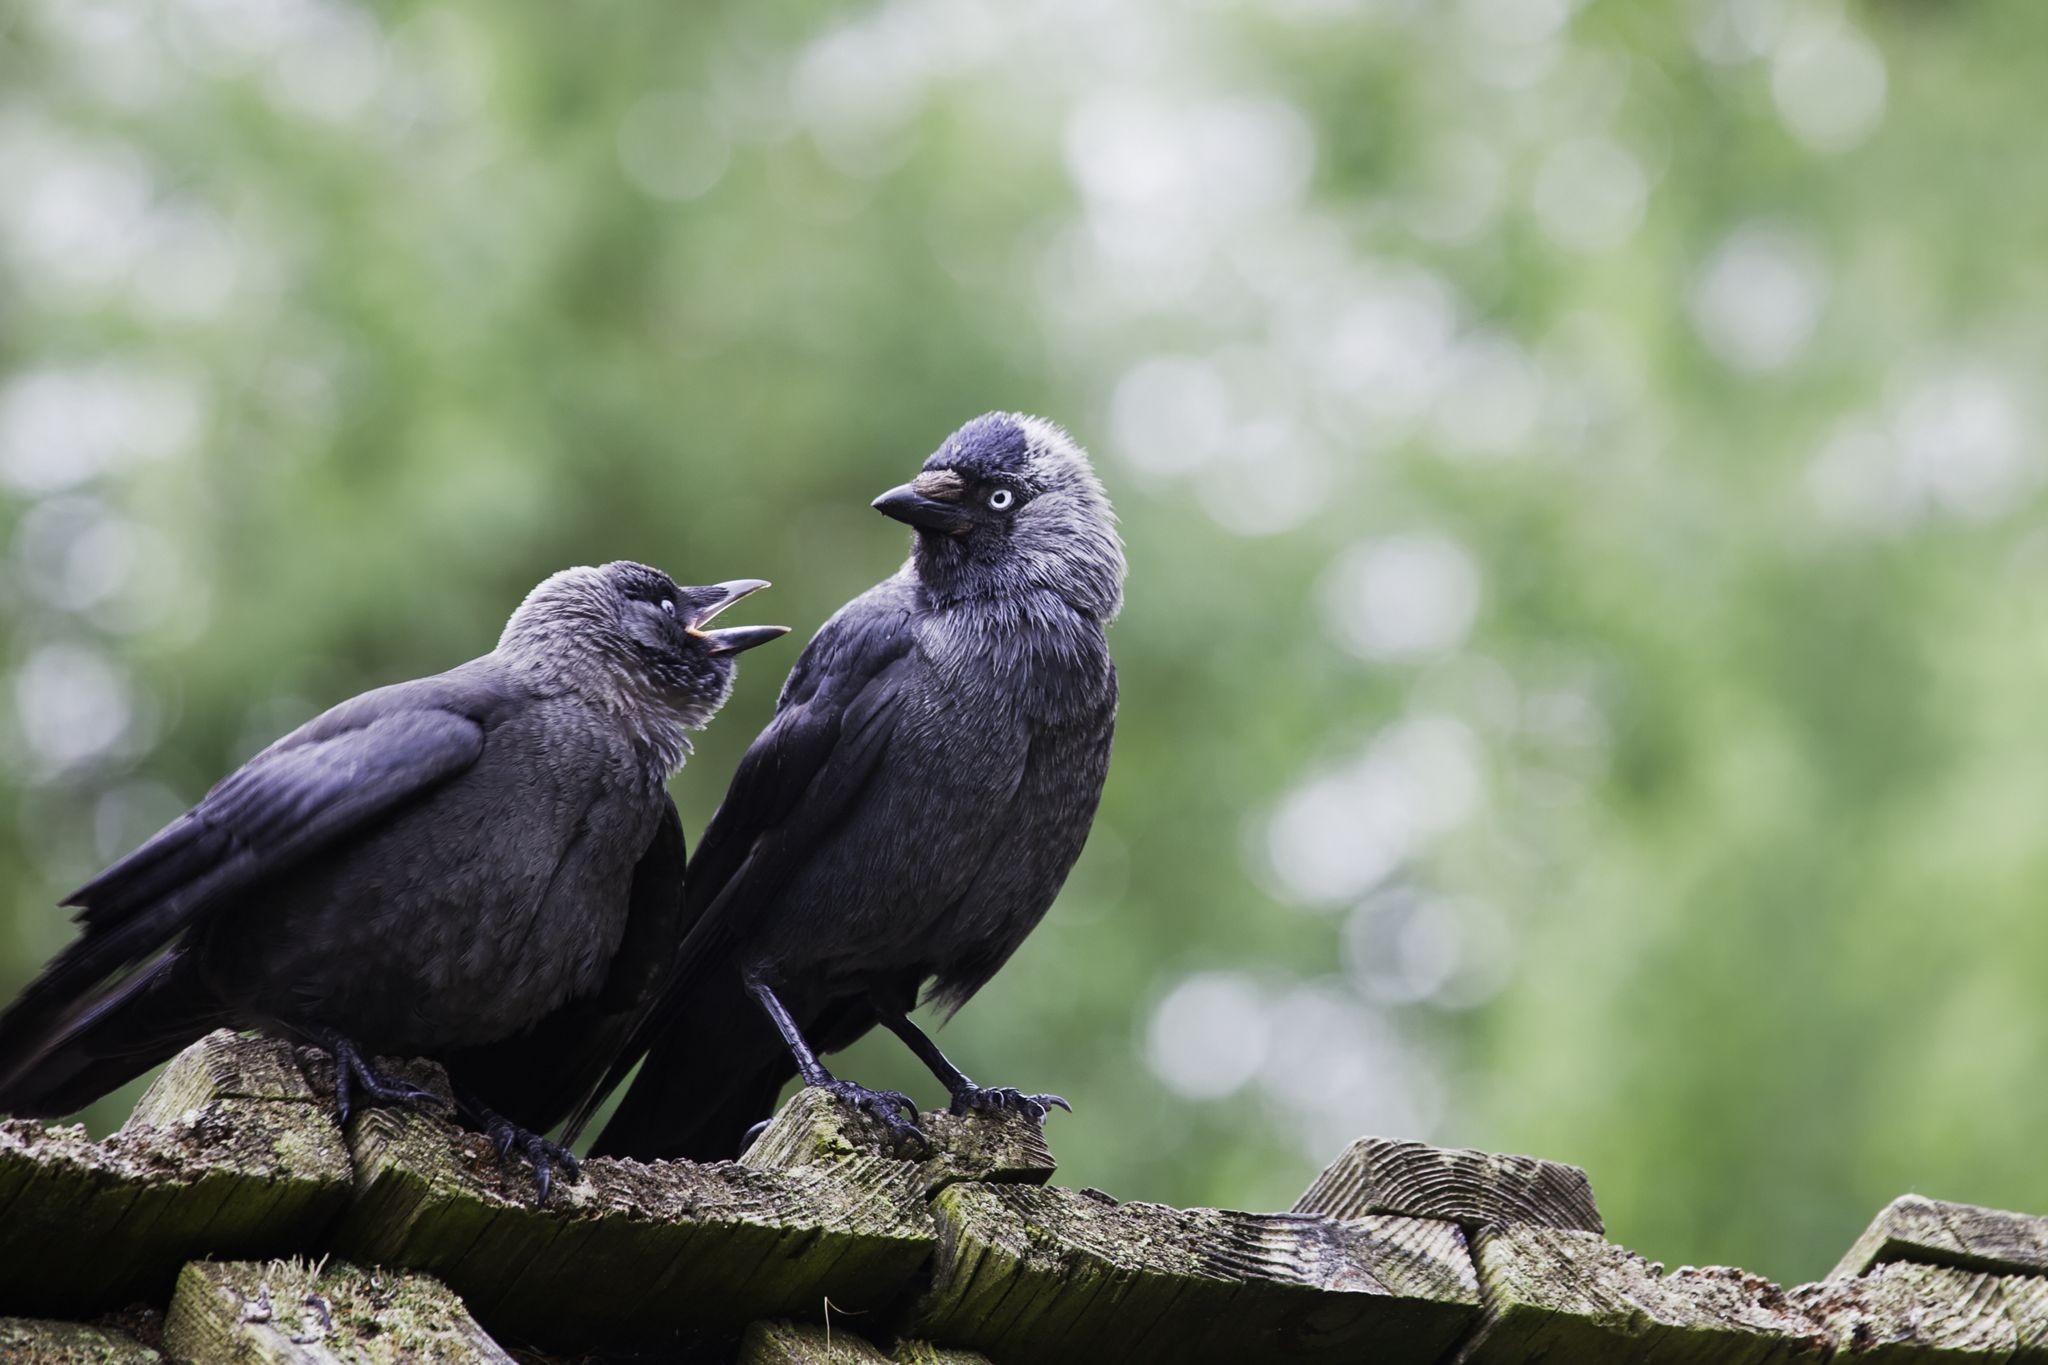 'Democratic' jackdaws use noise to make decisions